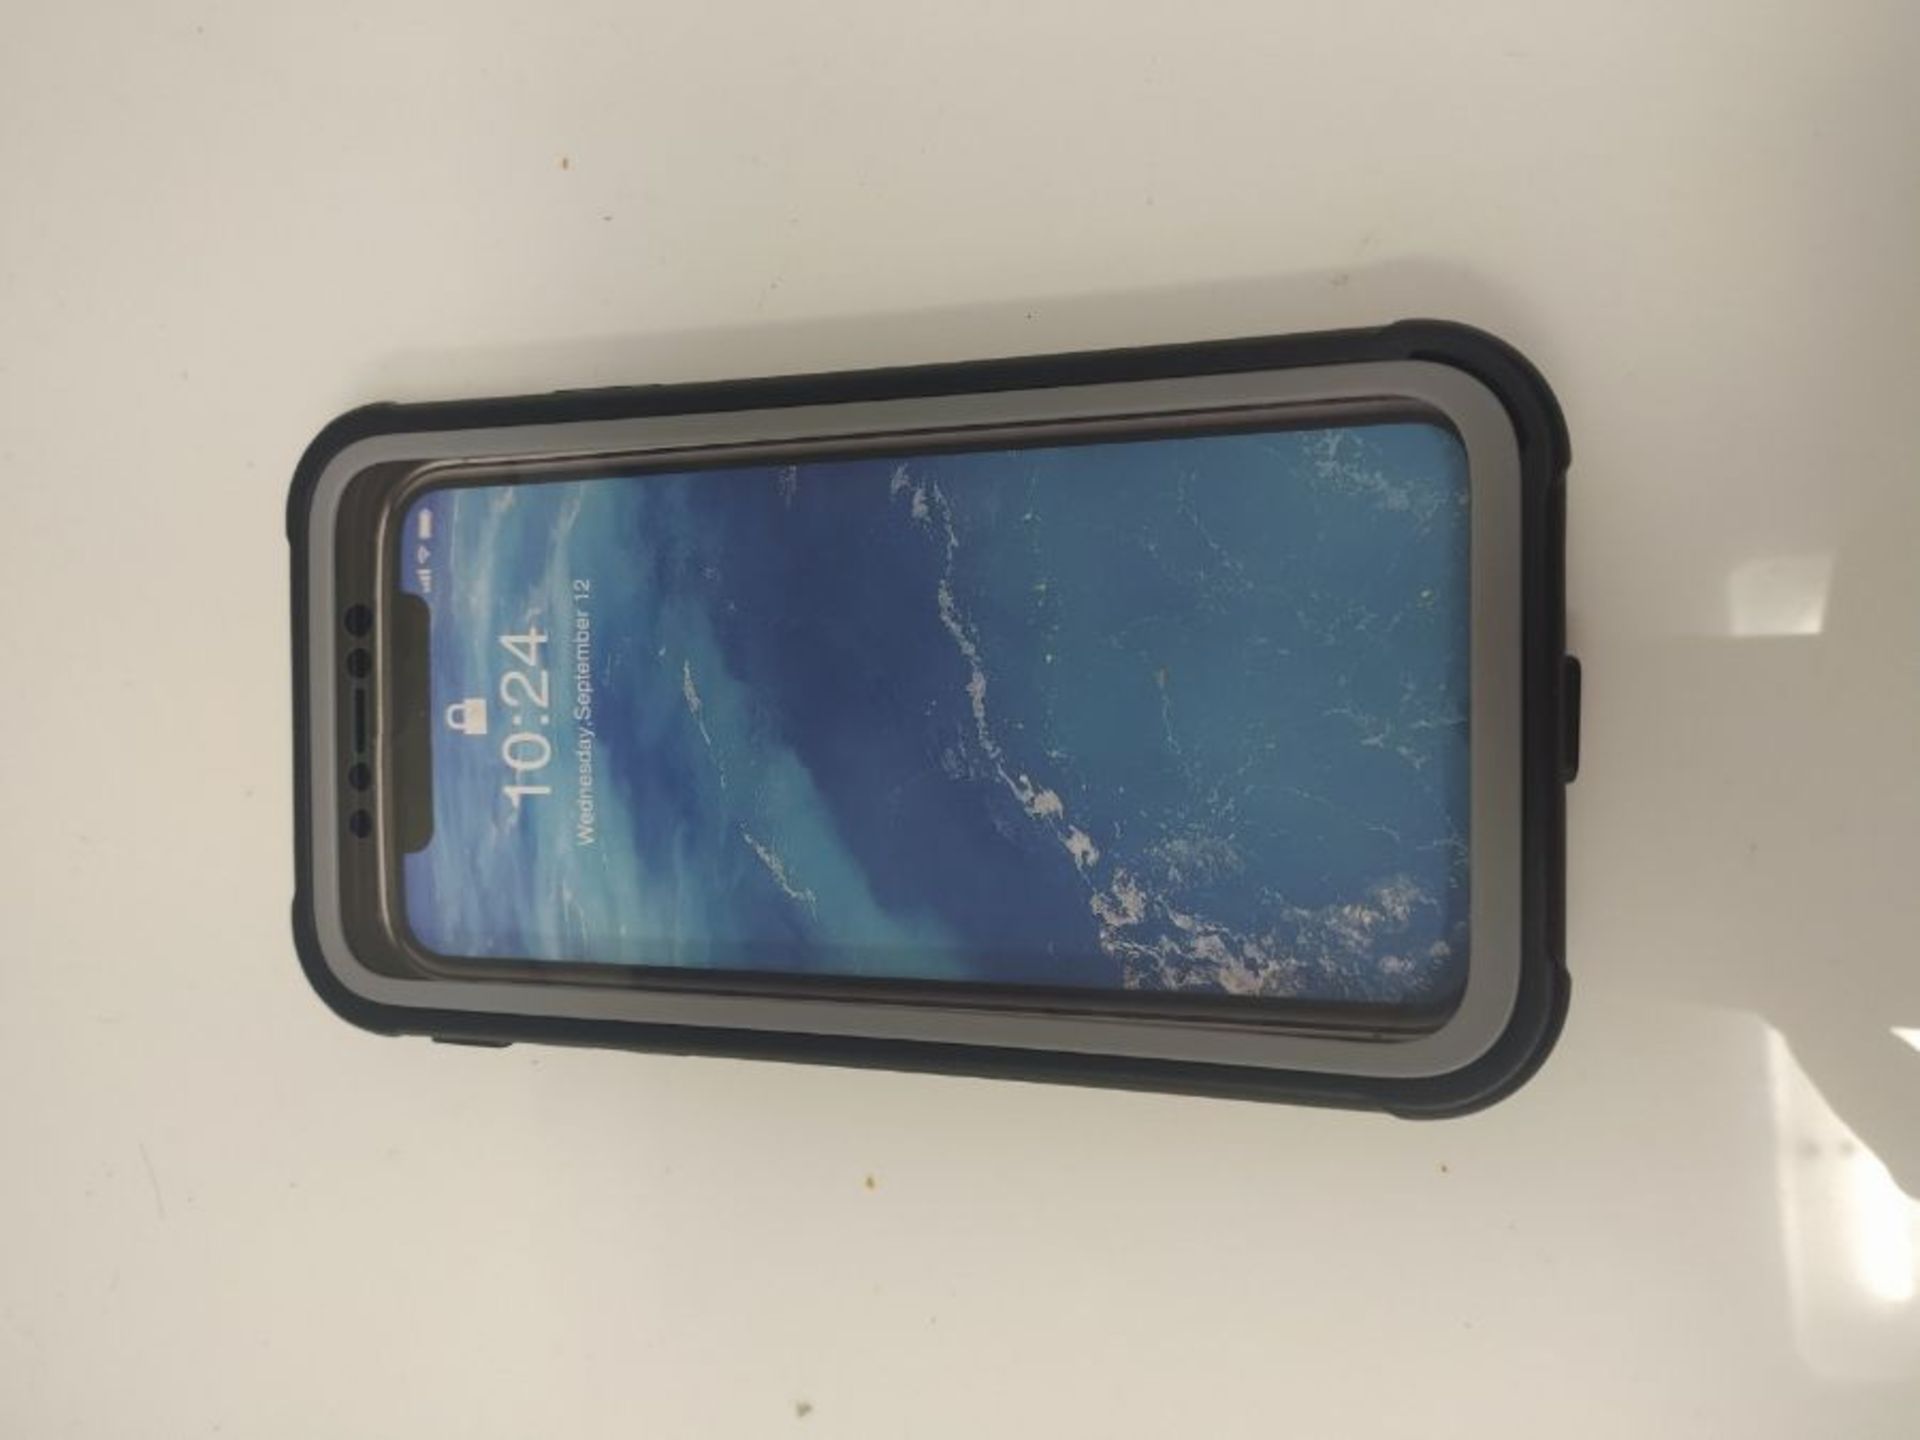 Prologfer iPhone XR Case 360 Degree Protection Built-in Screen Protector Cover Shockpr - Image 2 of 2